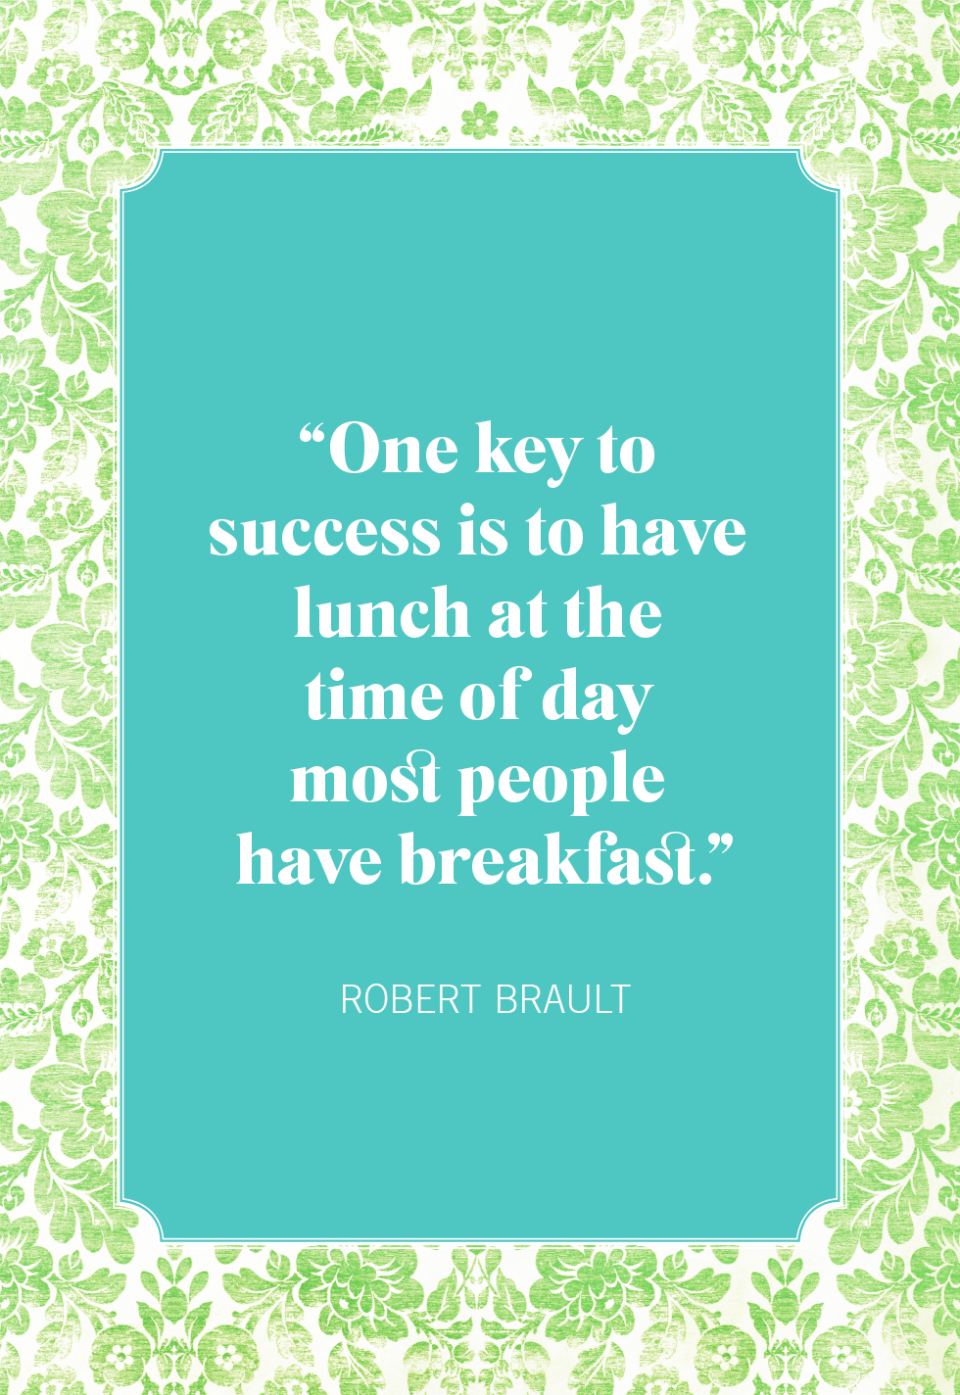 <p>“One key to success is to have lunch at the time of day most people have breakfast.”</p>